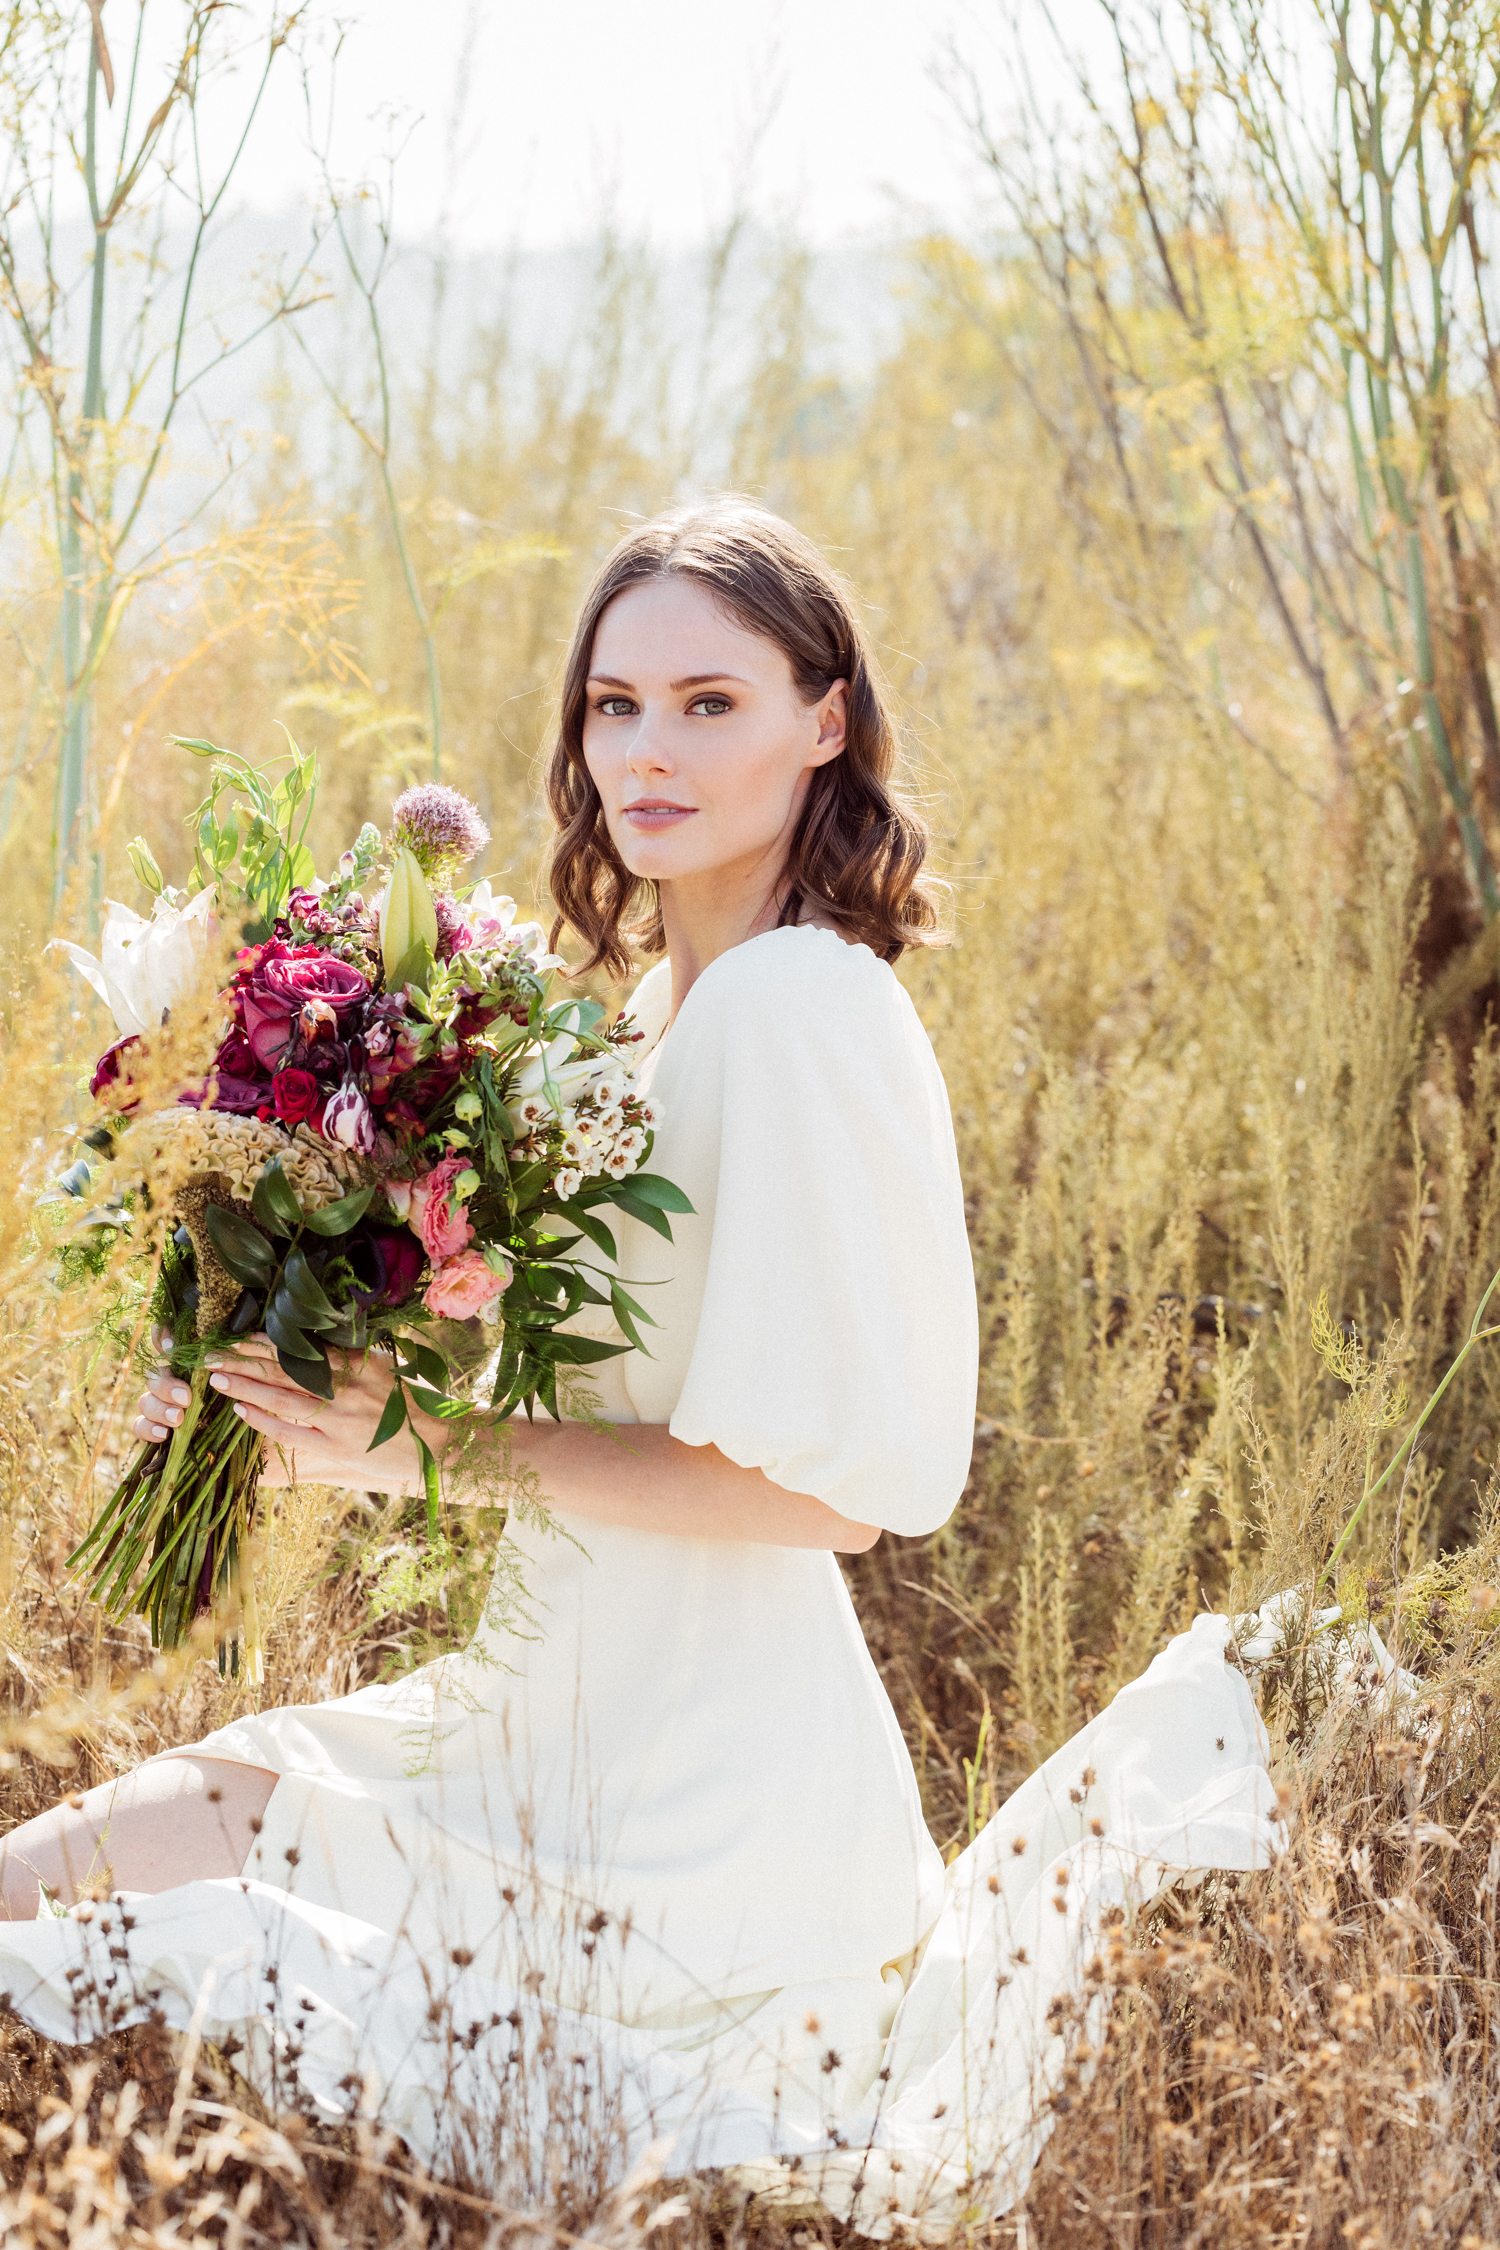 Alyssa Campanella of The A List blog shares her wedding bridal look for the romantic bride with David's Bridal